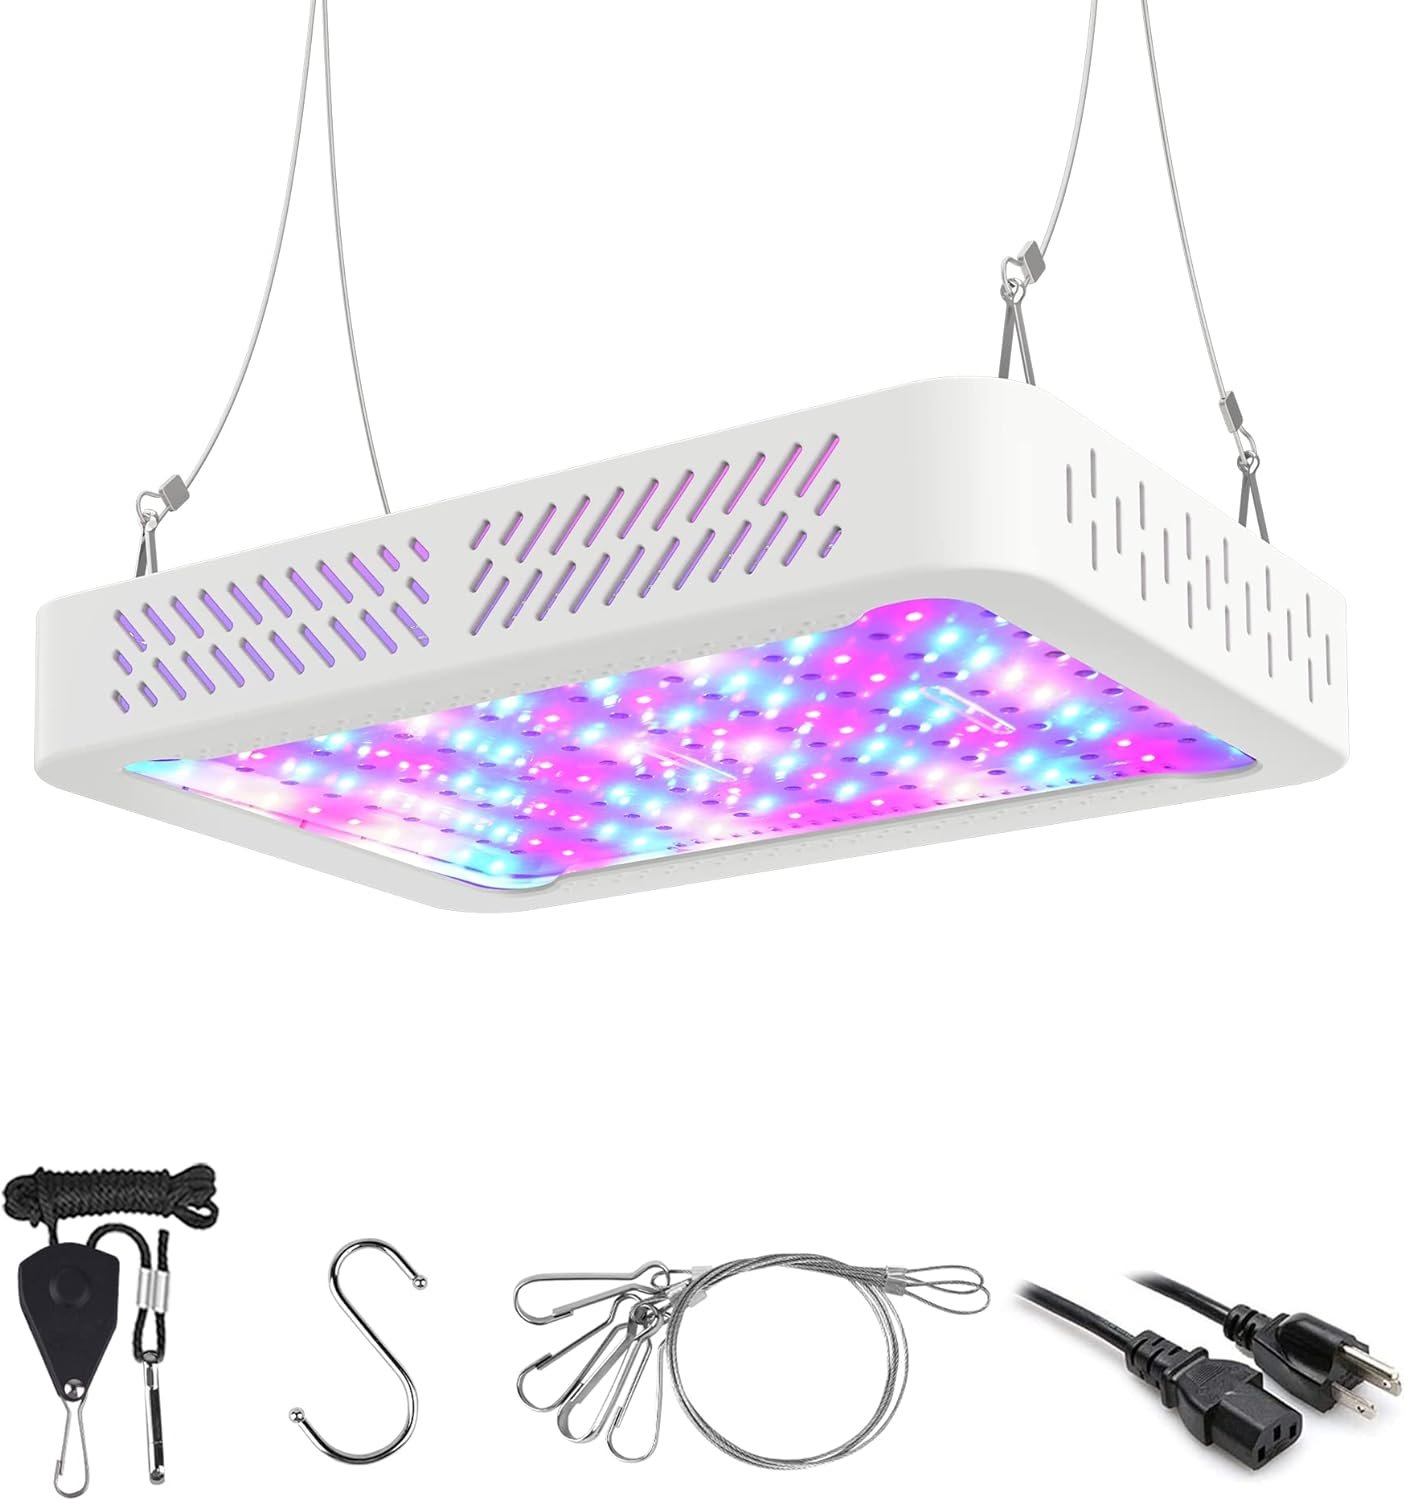 Beelux 1000W LED Grow Light for Indoor Plants Full Spectrum Upgrade Dual Switch  Dual Chips Daisy Chain Plant Grow Lights for Seed Starting Veg and Flower Greenhouse (Actual Power 110W)